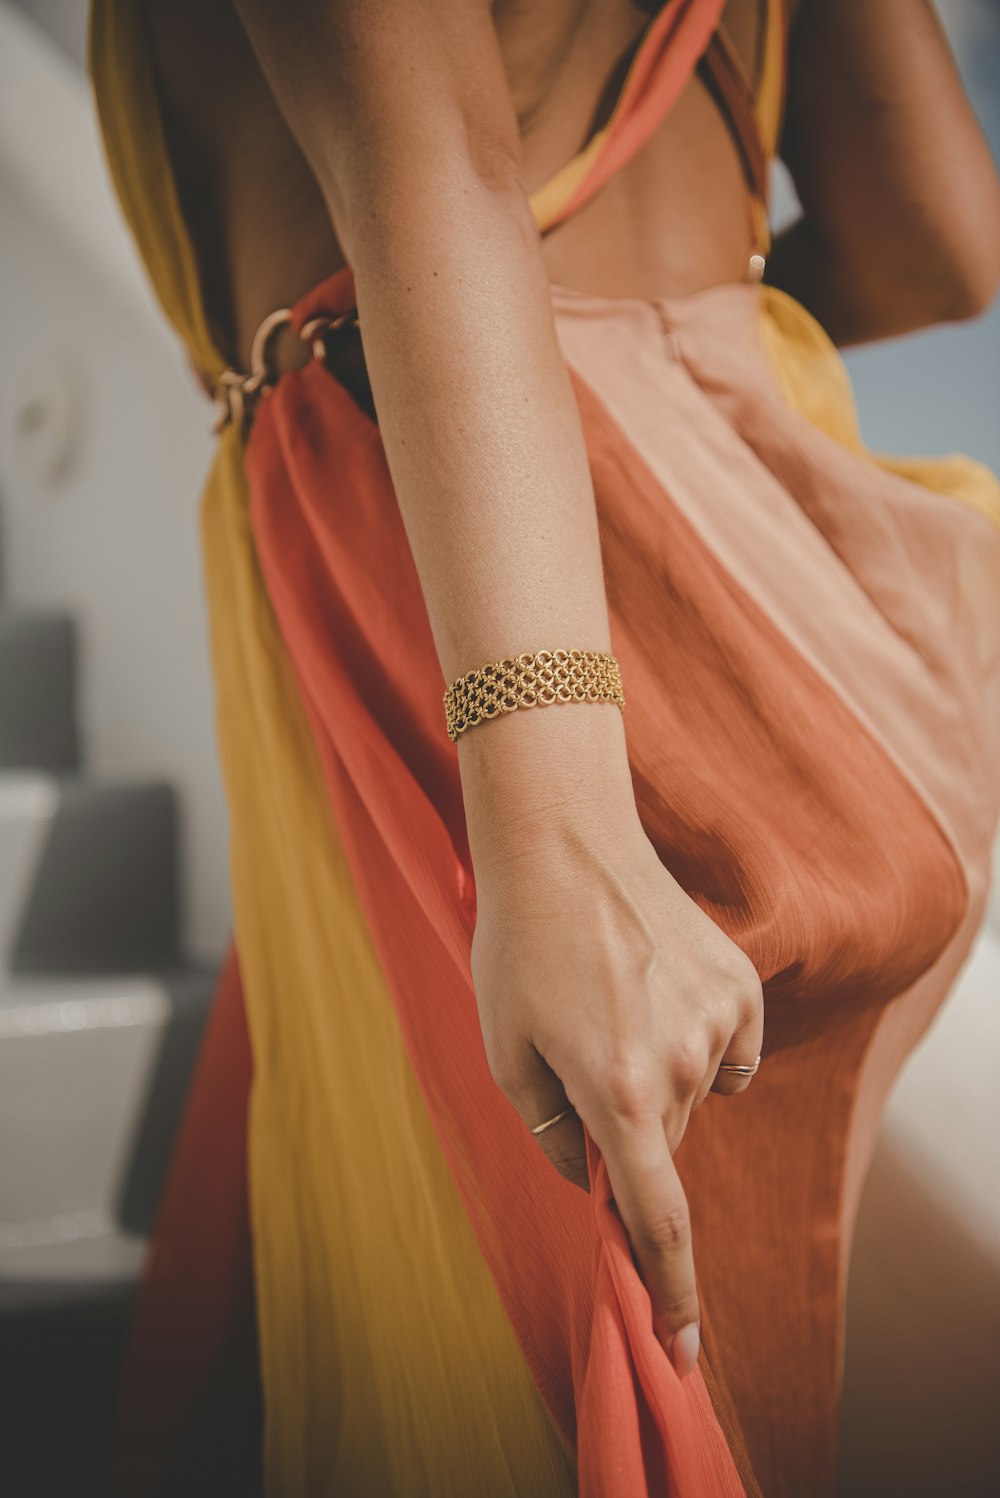 a woman wearing a yellow and orange dress and a bracelet